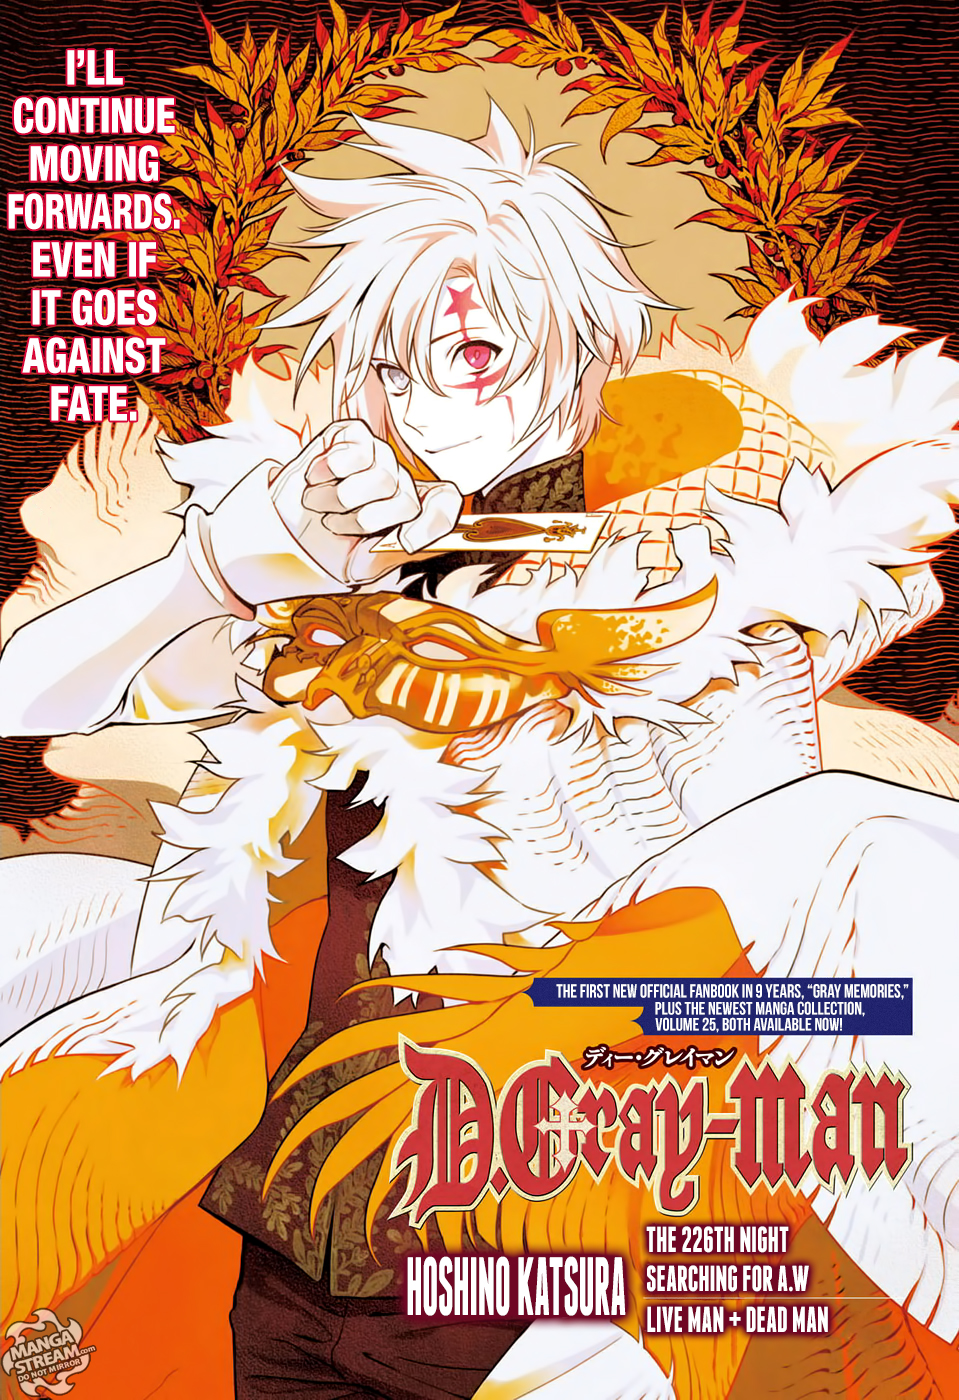 D.Gray-man chapter 226 page 1